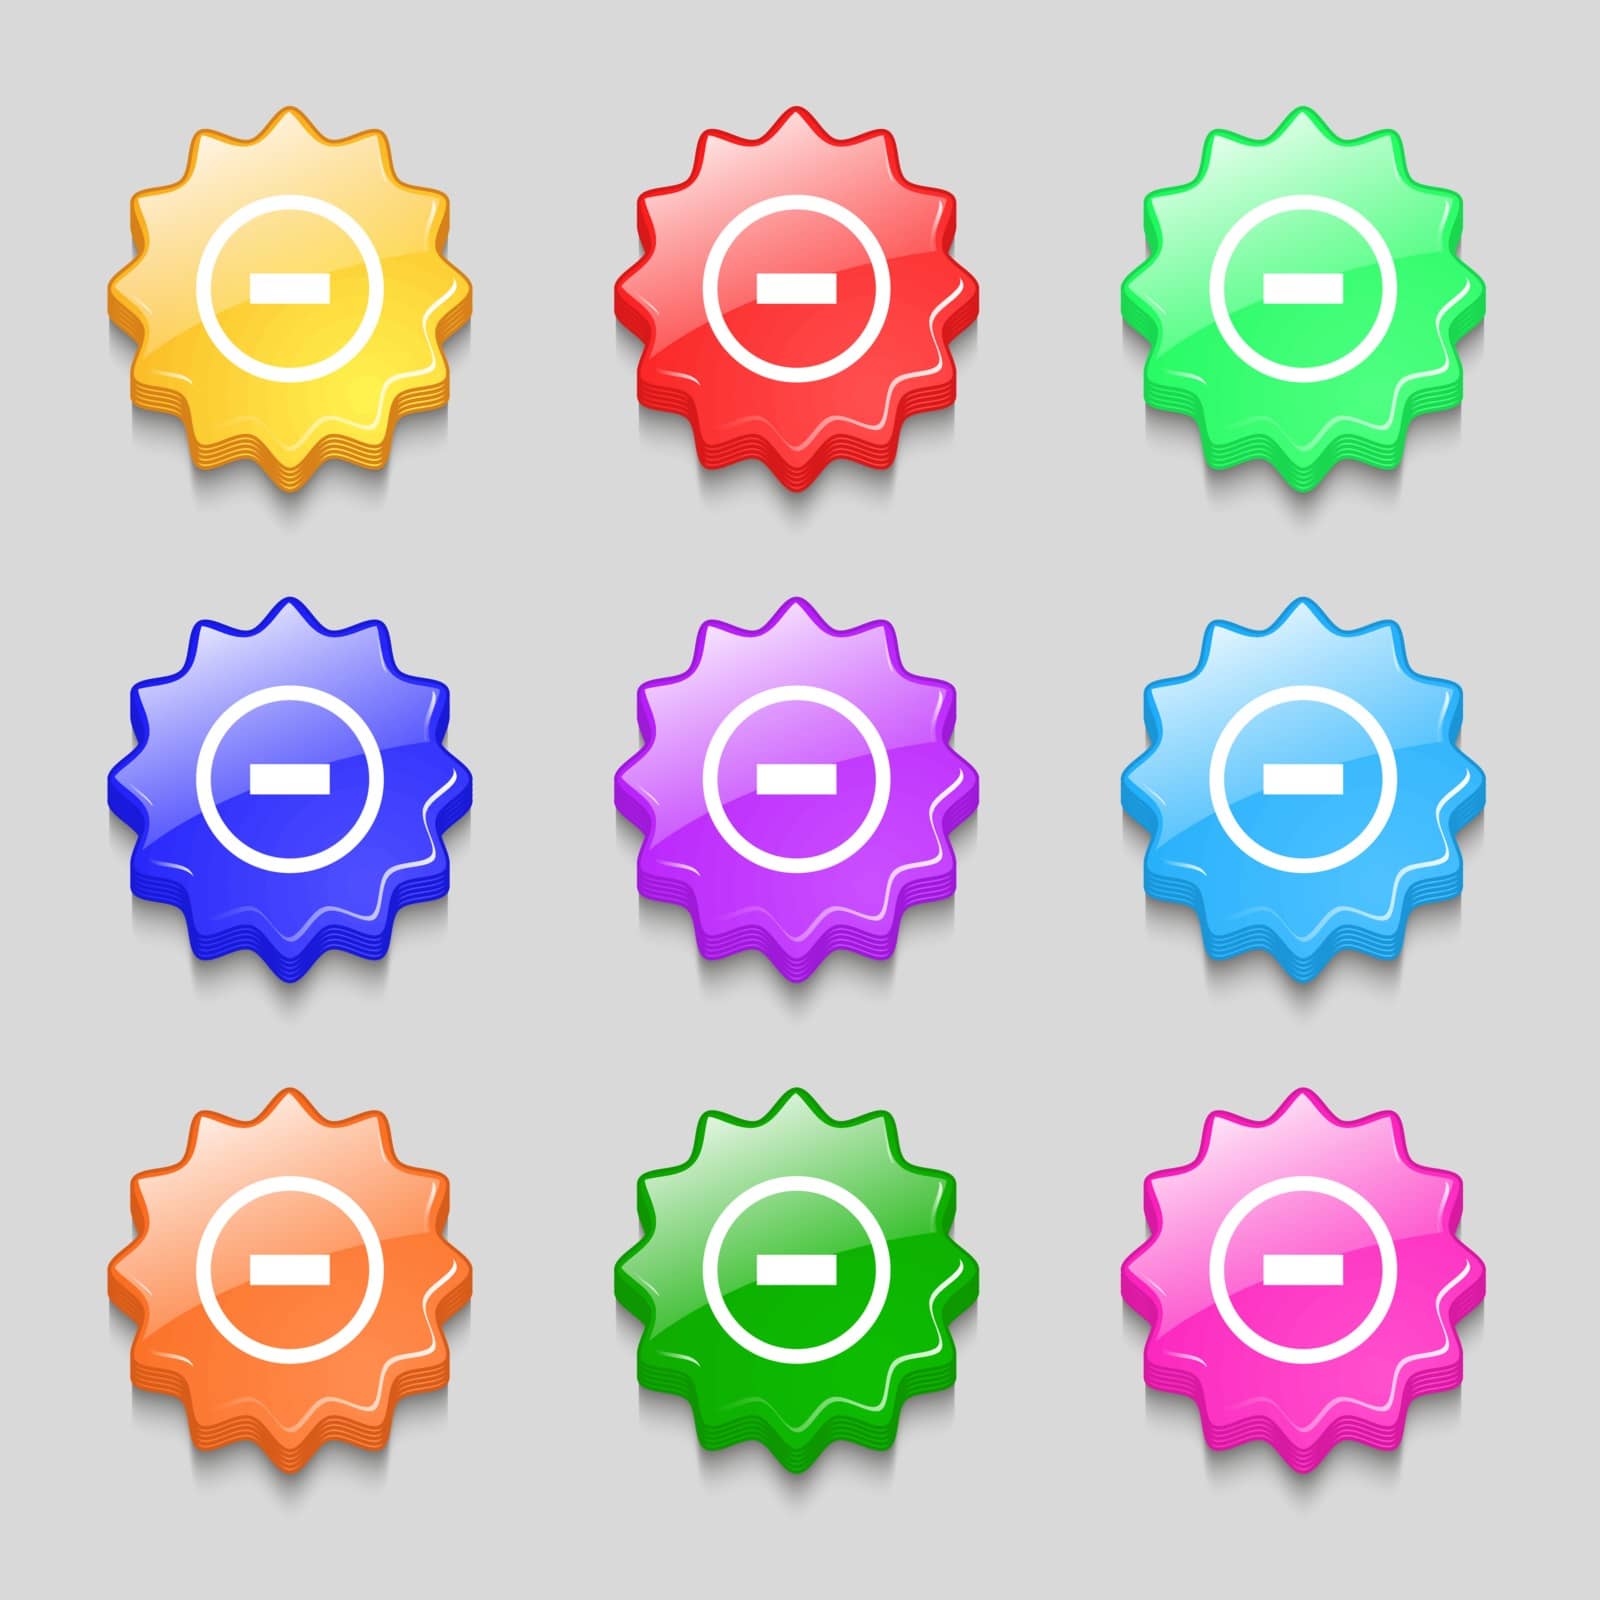 Minus sign icon. Negative symbol. Zoom out. Symbols on nine wavy colourful buttons. Vector illustration